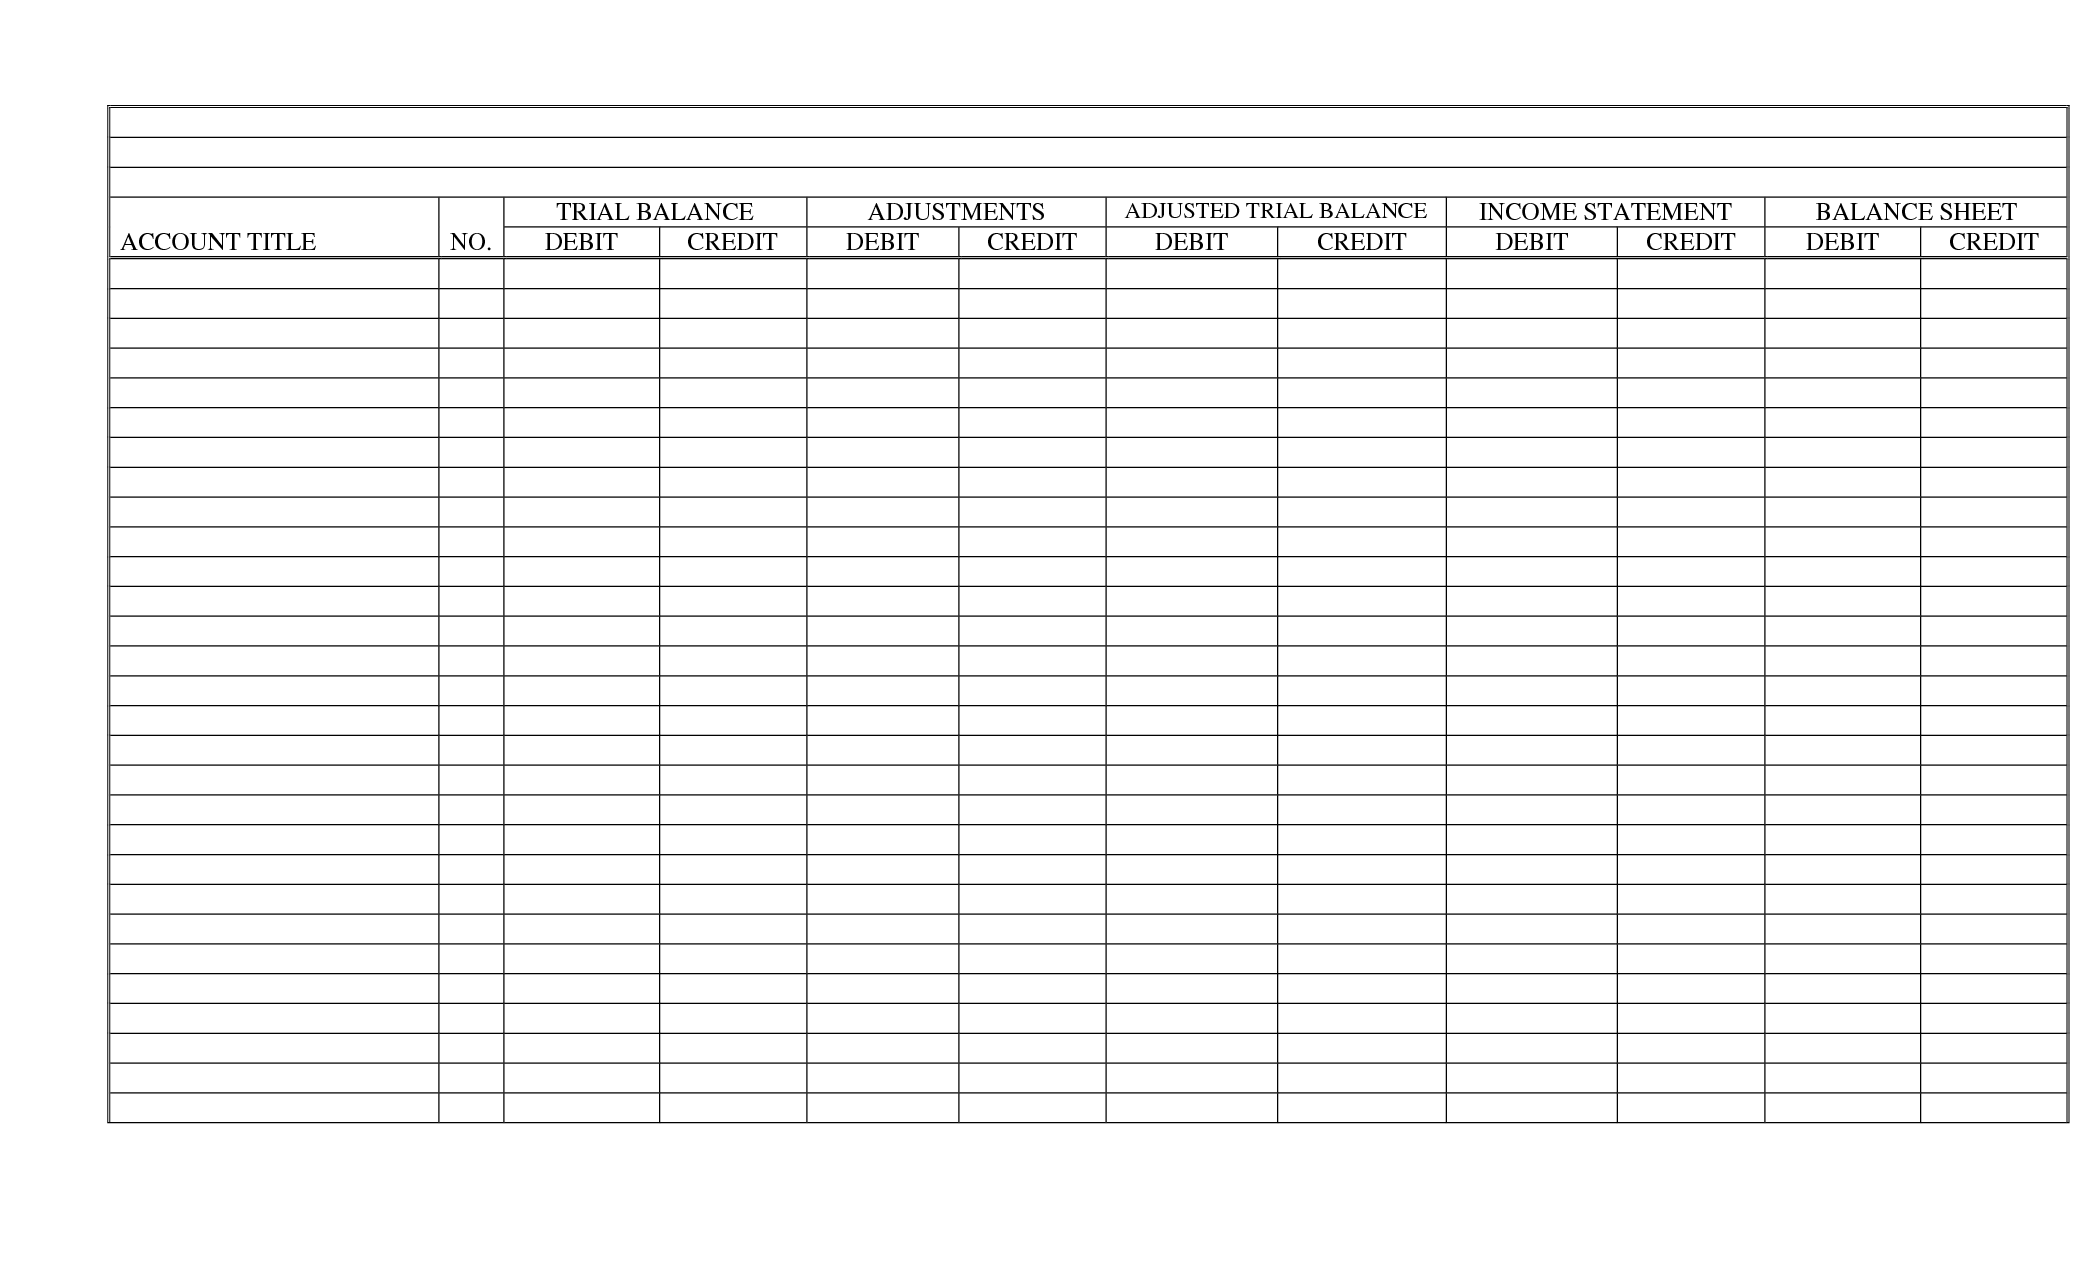 11-best-images-of-3-column-worksheet-free-printable-accounting-ledger-sheets-blank-10-column